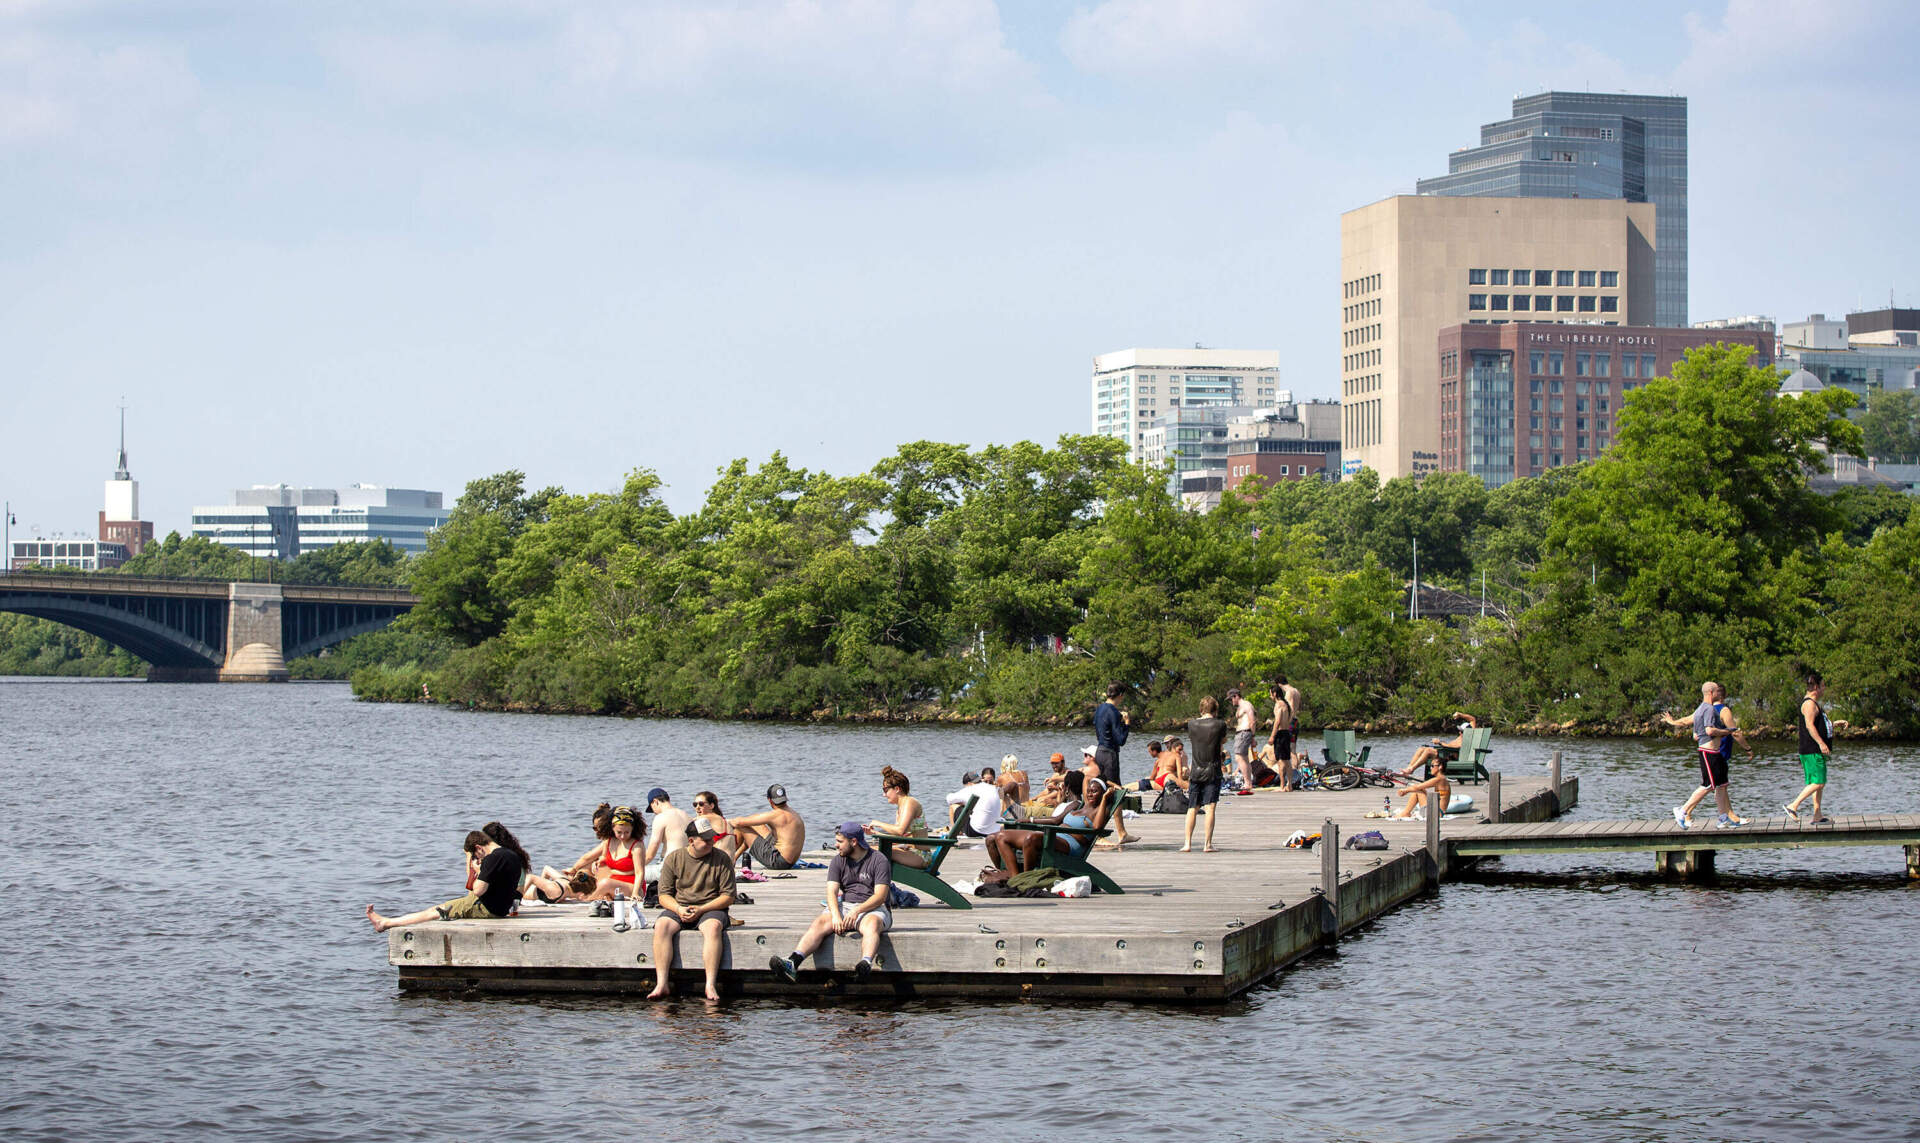 Bostonians seeking relief from the heat gather on a dock by the Charles River Esplanade. (Robin Lubbock/WBUR)